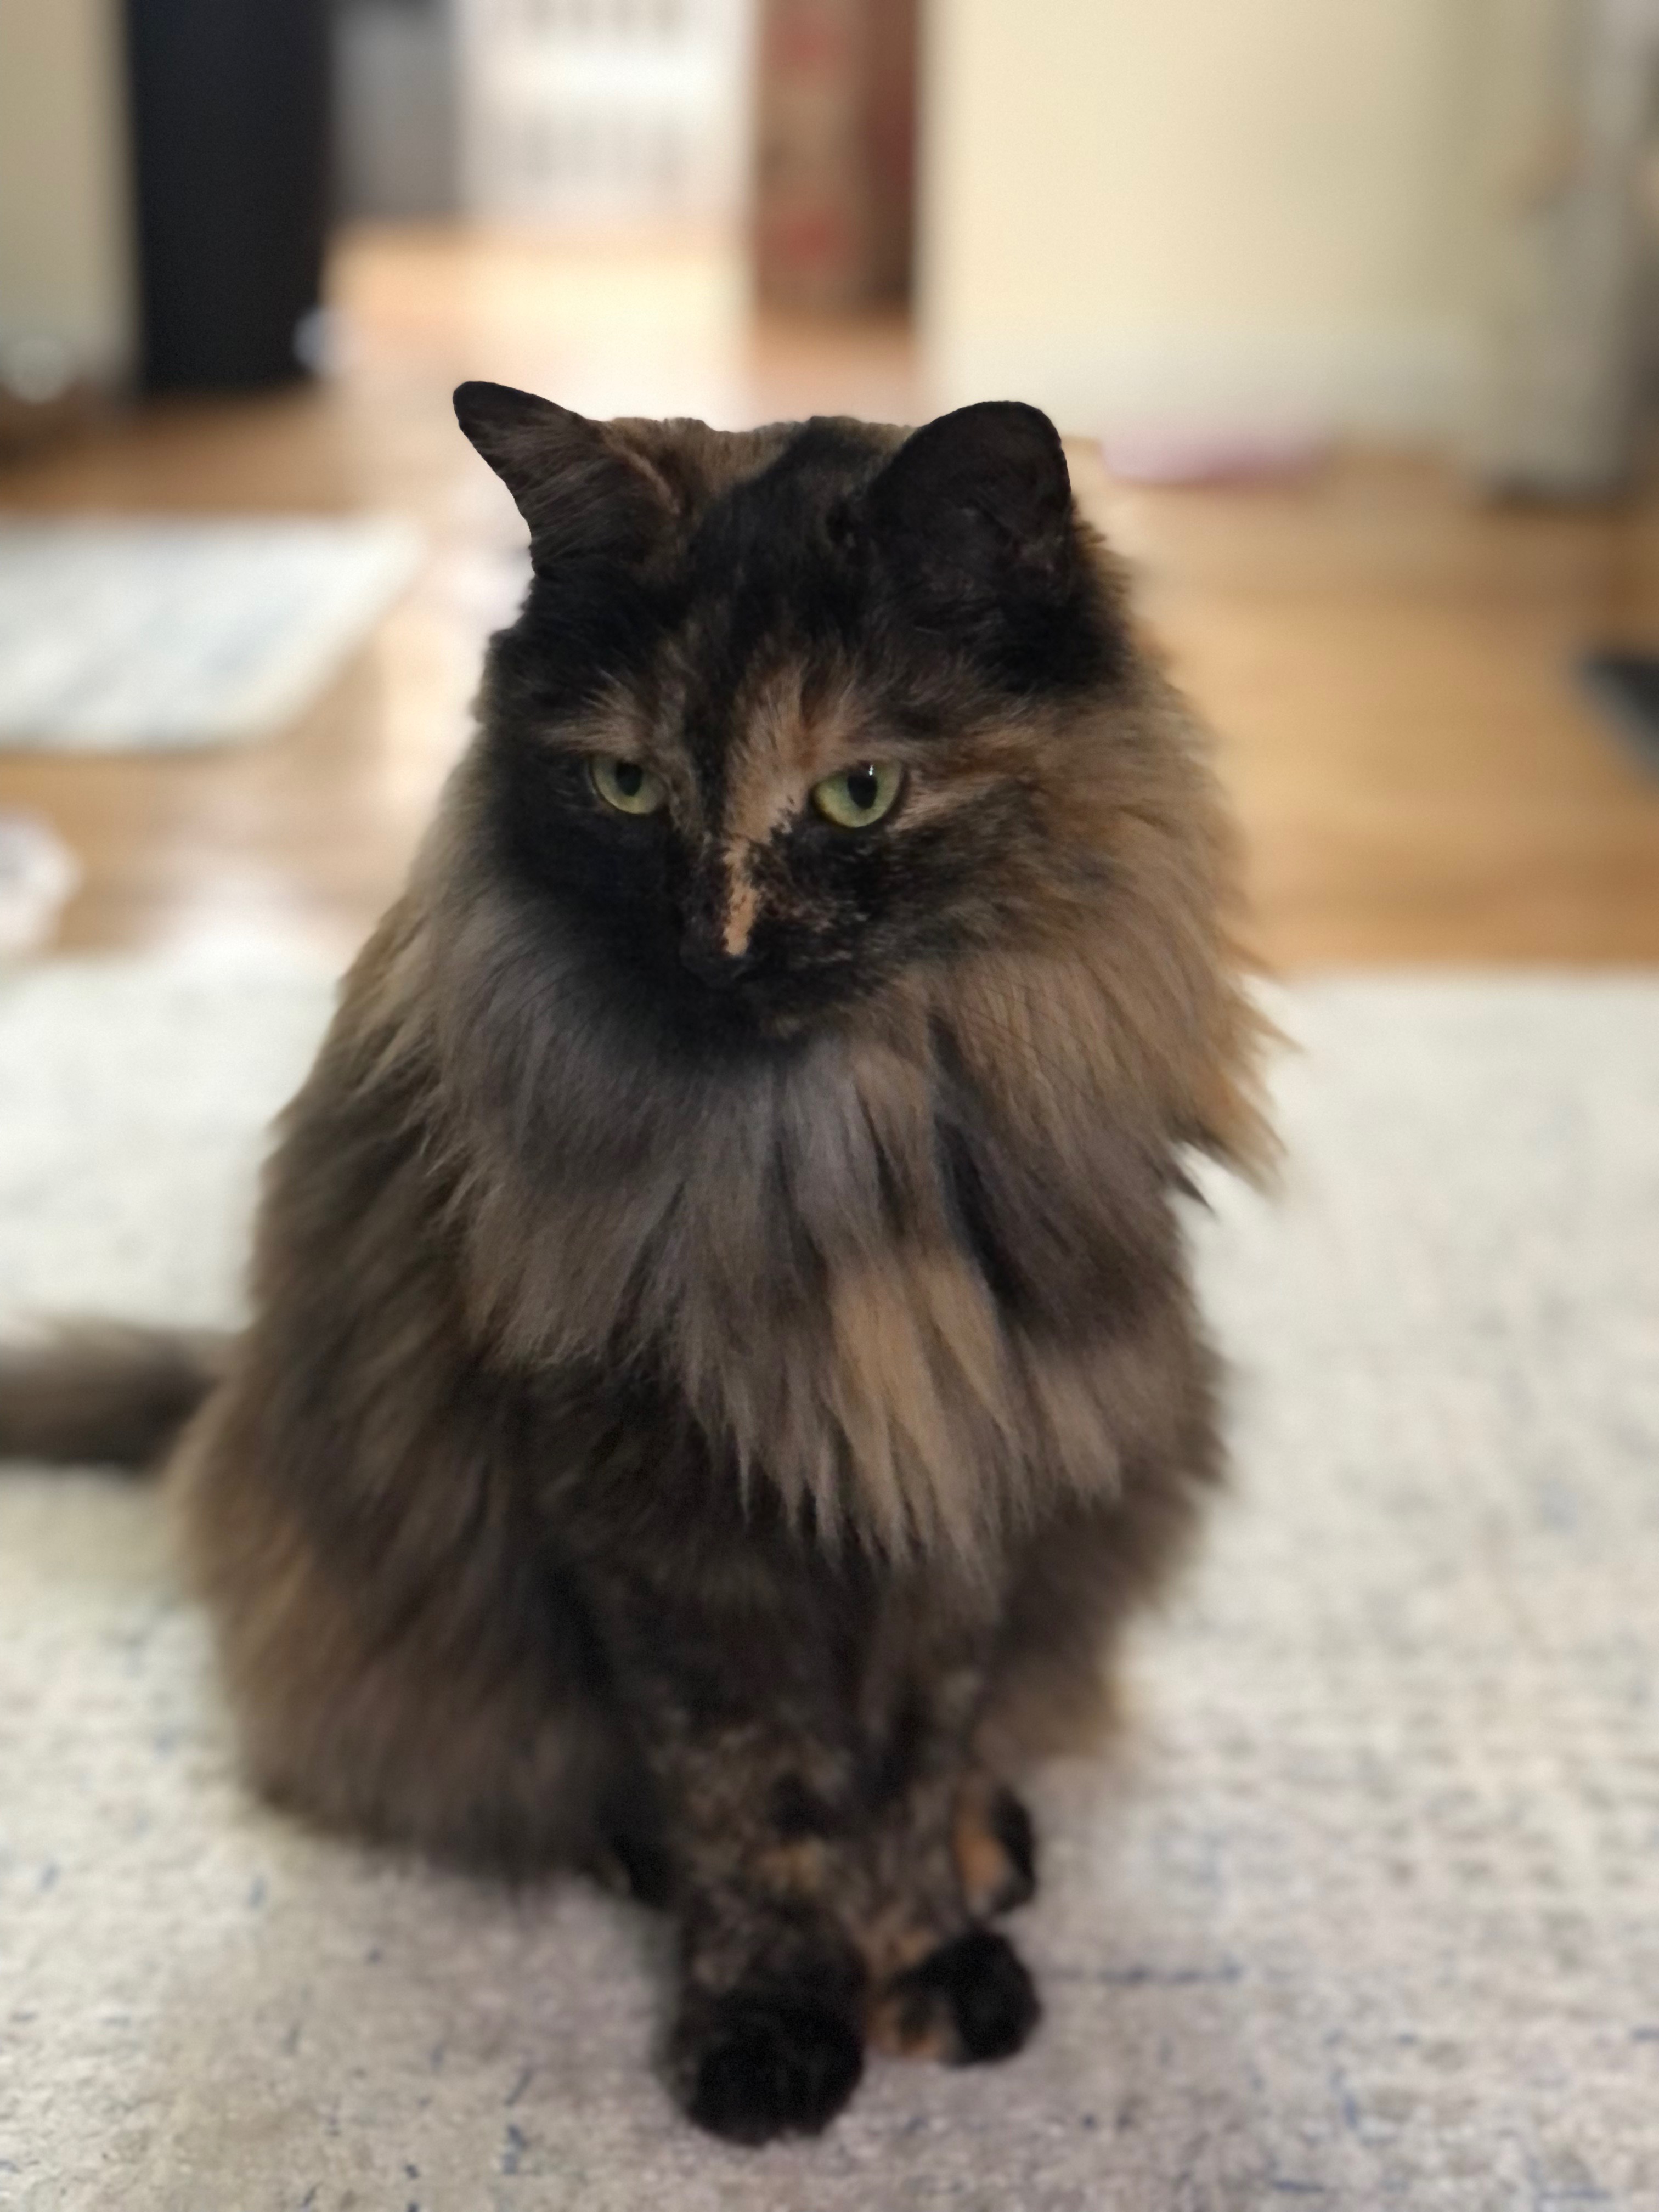 A picture of a black/brown/gray domestic long-haired cat sitting patiently.